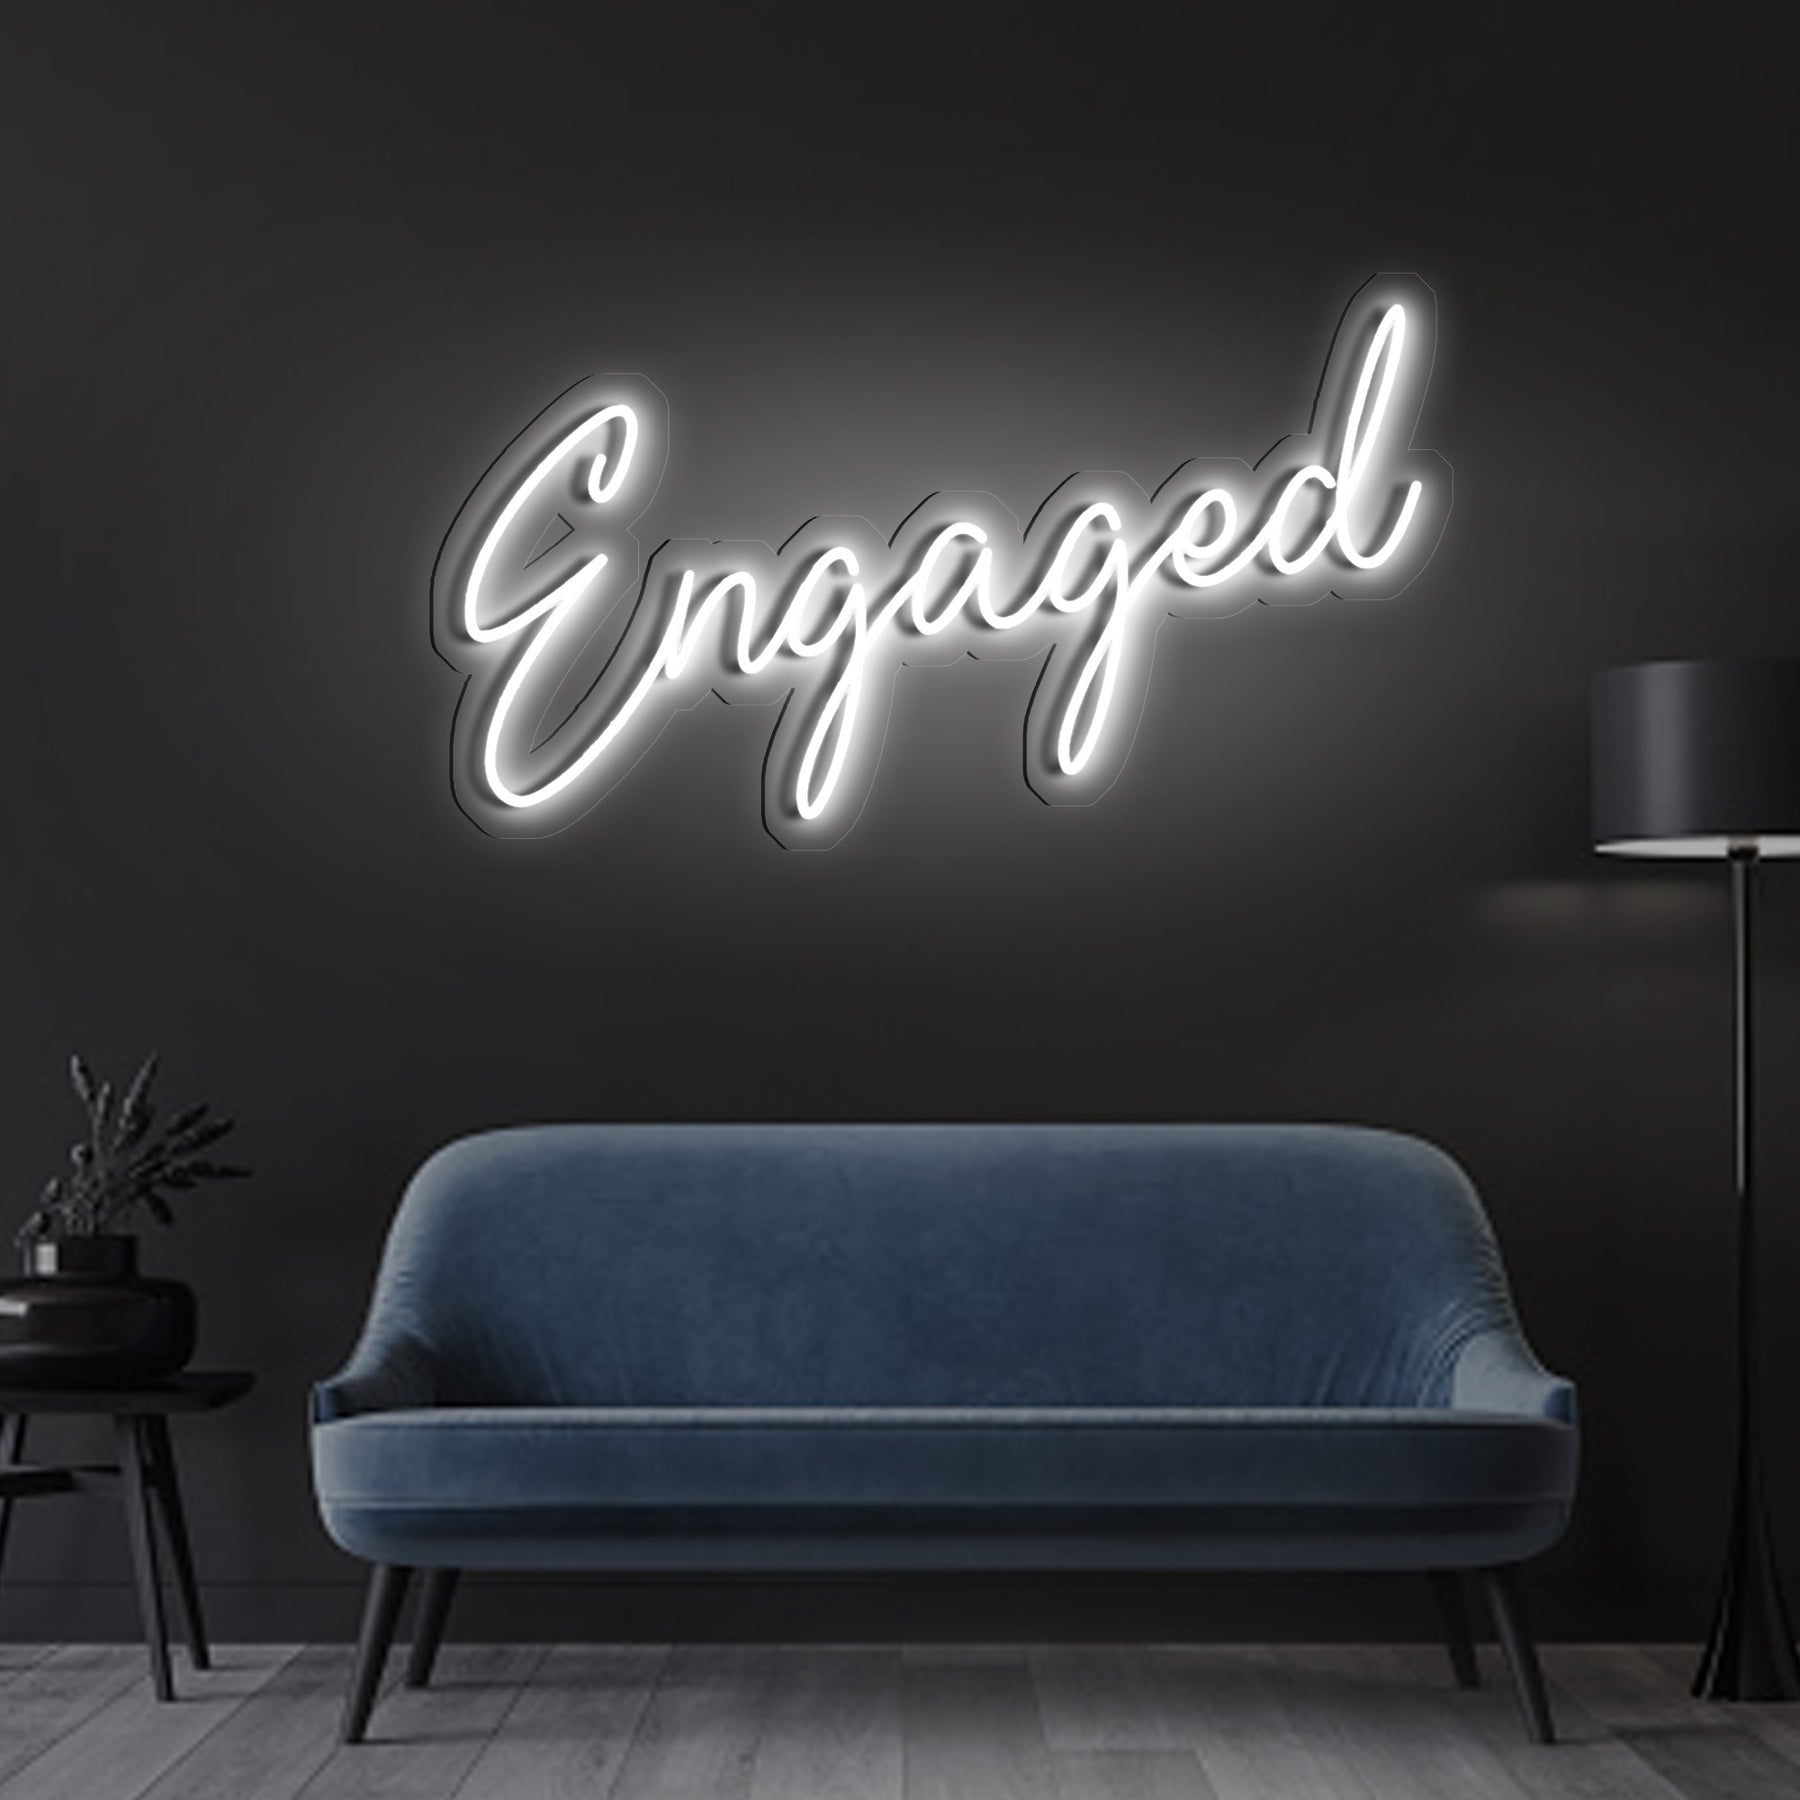 Engaged neon sign